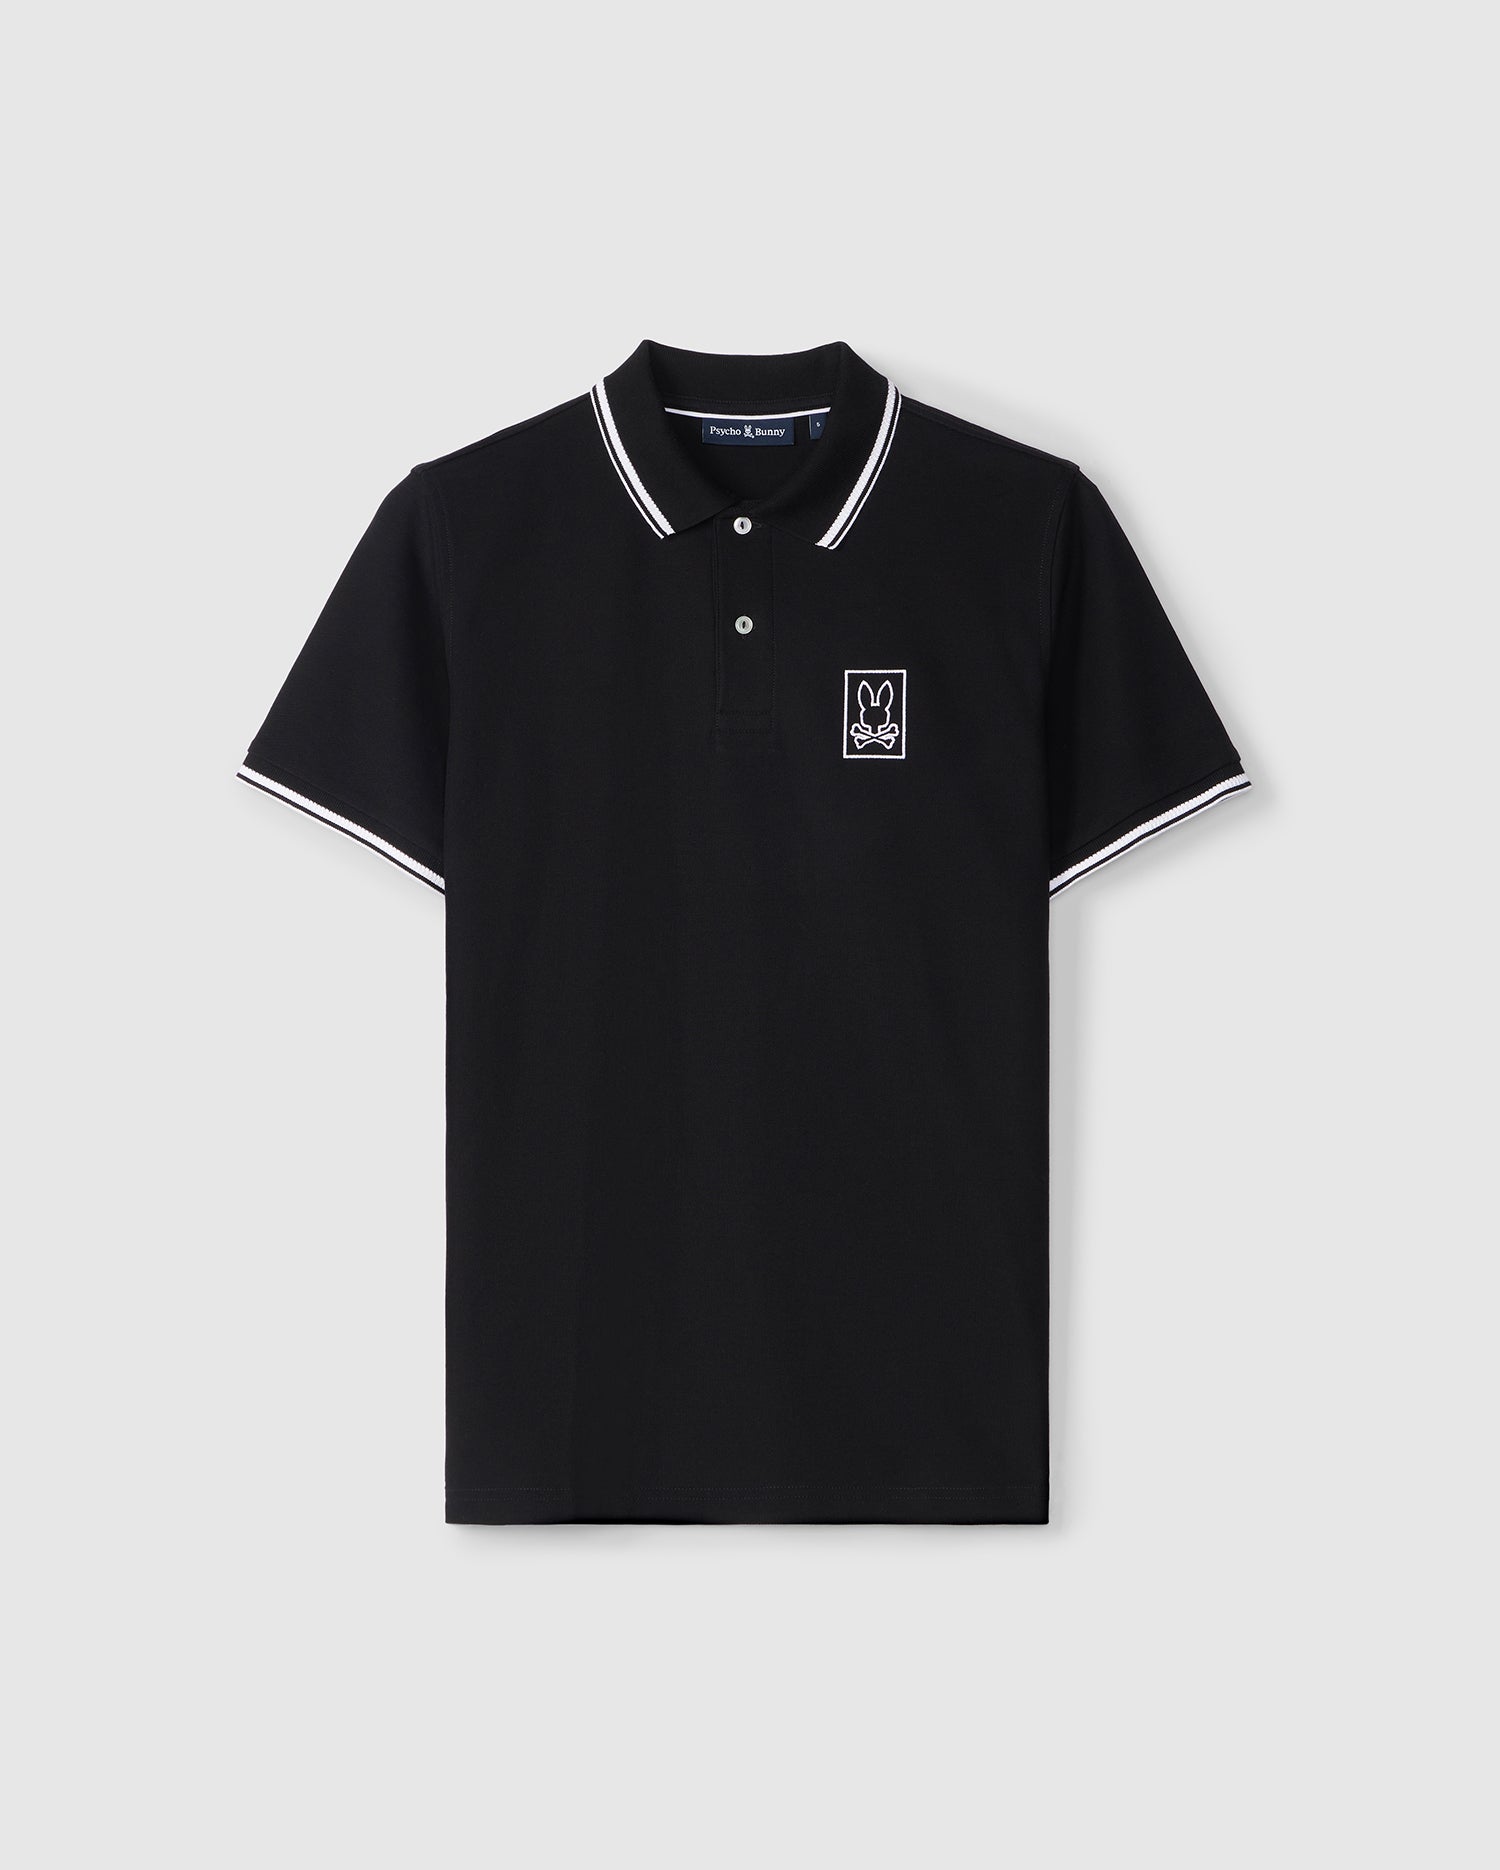 A black Psycho Bunny polo shirt with contrasting white crease-resistant collar and sleeve trim, featuring a small white embroidered logo on the left chest area. The shirt is displayed on a plain background.